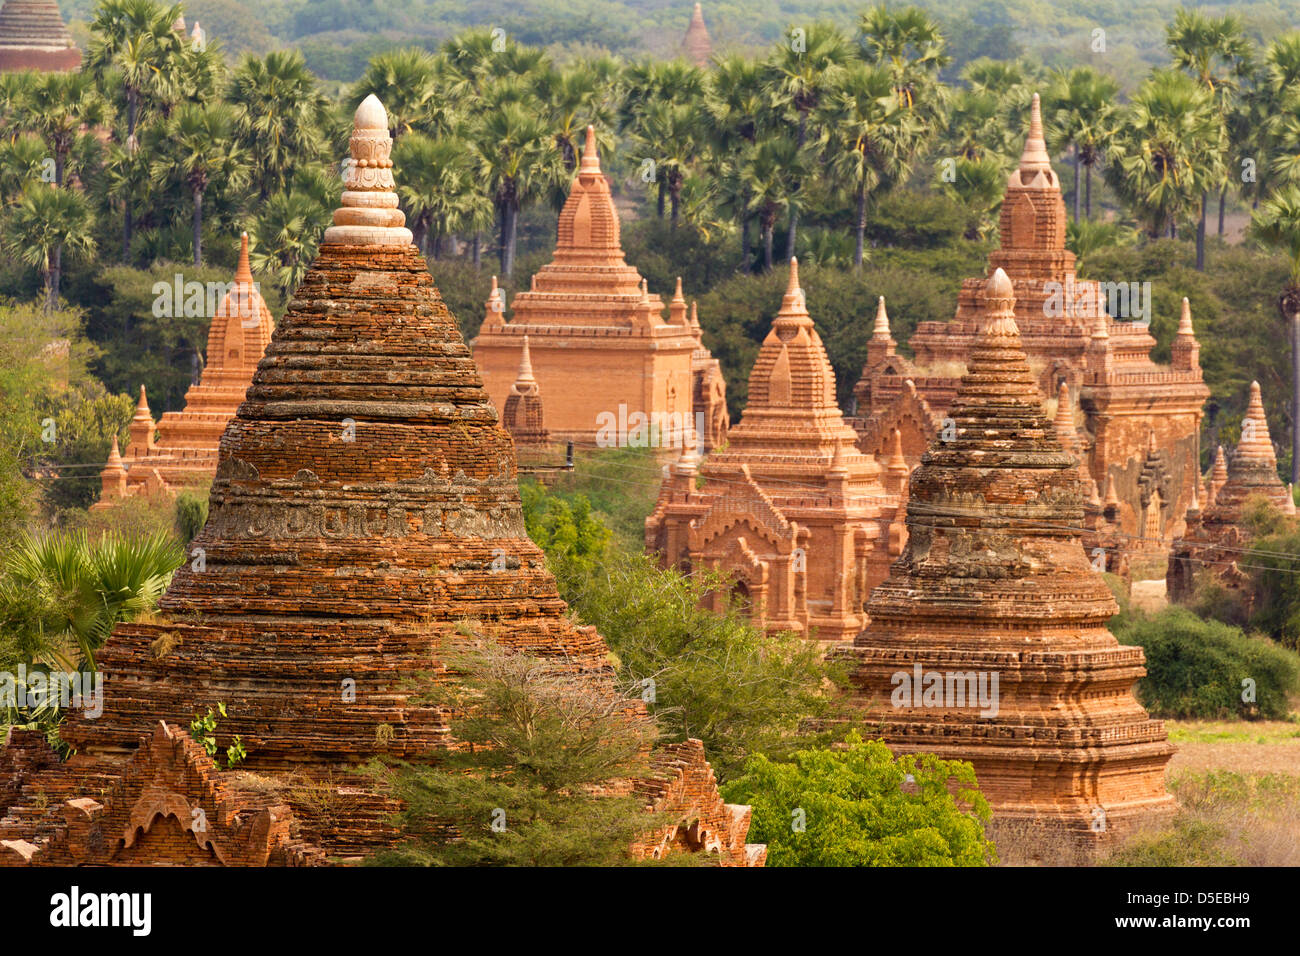 The Temples and Pagodas of Bagan, Myanmar - early morning 8 Stock Photo